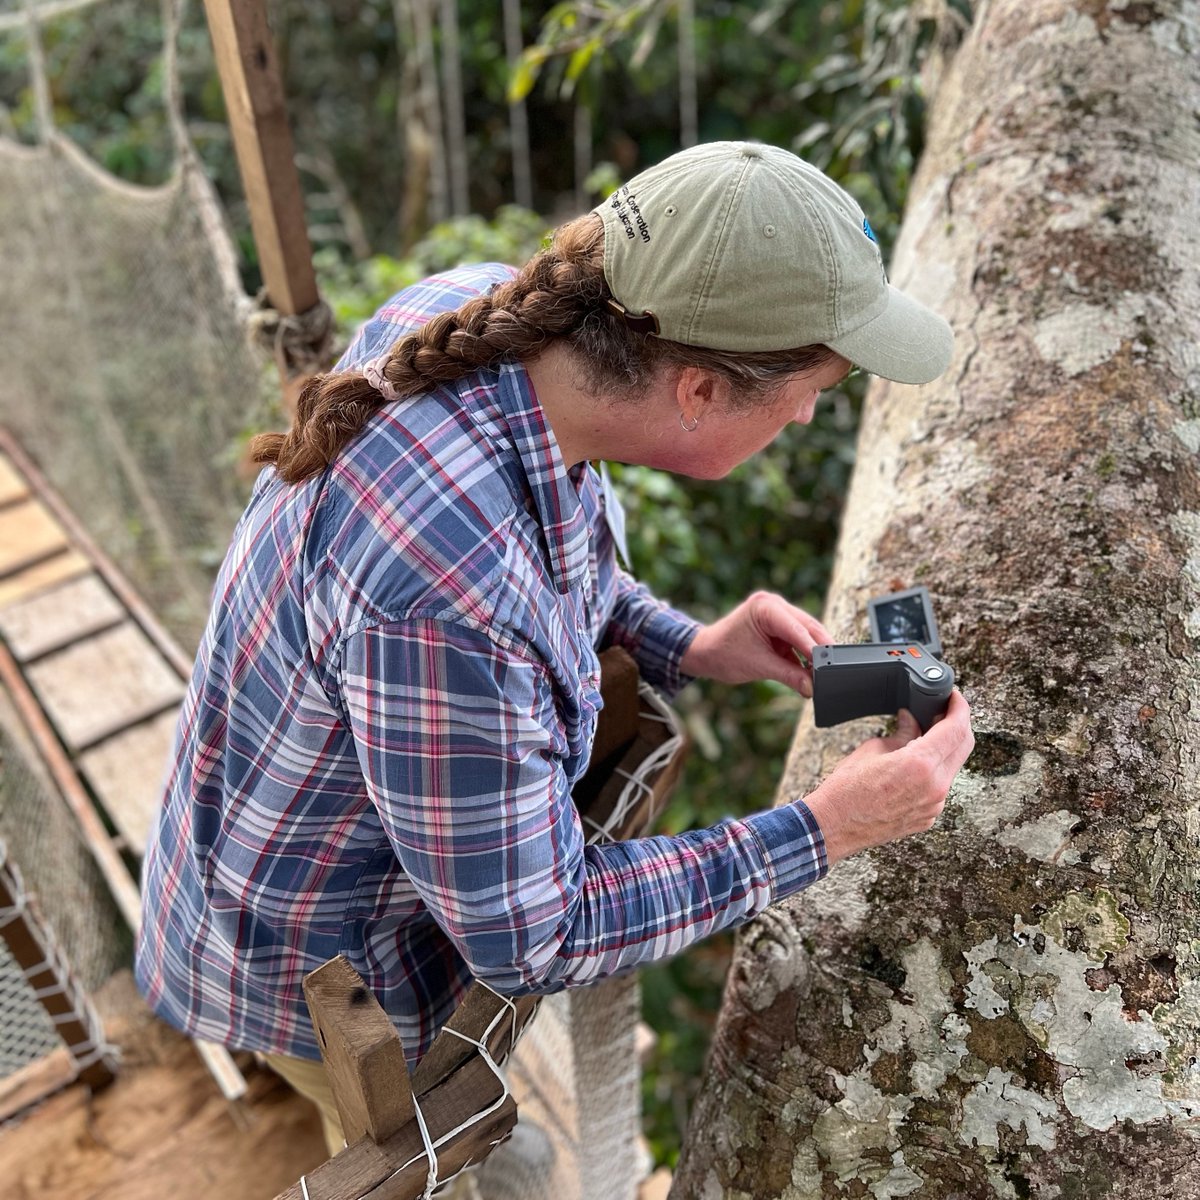 Kristie & Jessica of @thebugchicks are teaching a course in the Amazon Rainforest with @morphoinstitute & @exploramaperu. Their Celestron FlipView microscopes help the class get a close look at lichens, leaves &, of course, bugs!